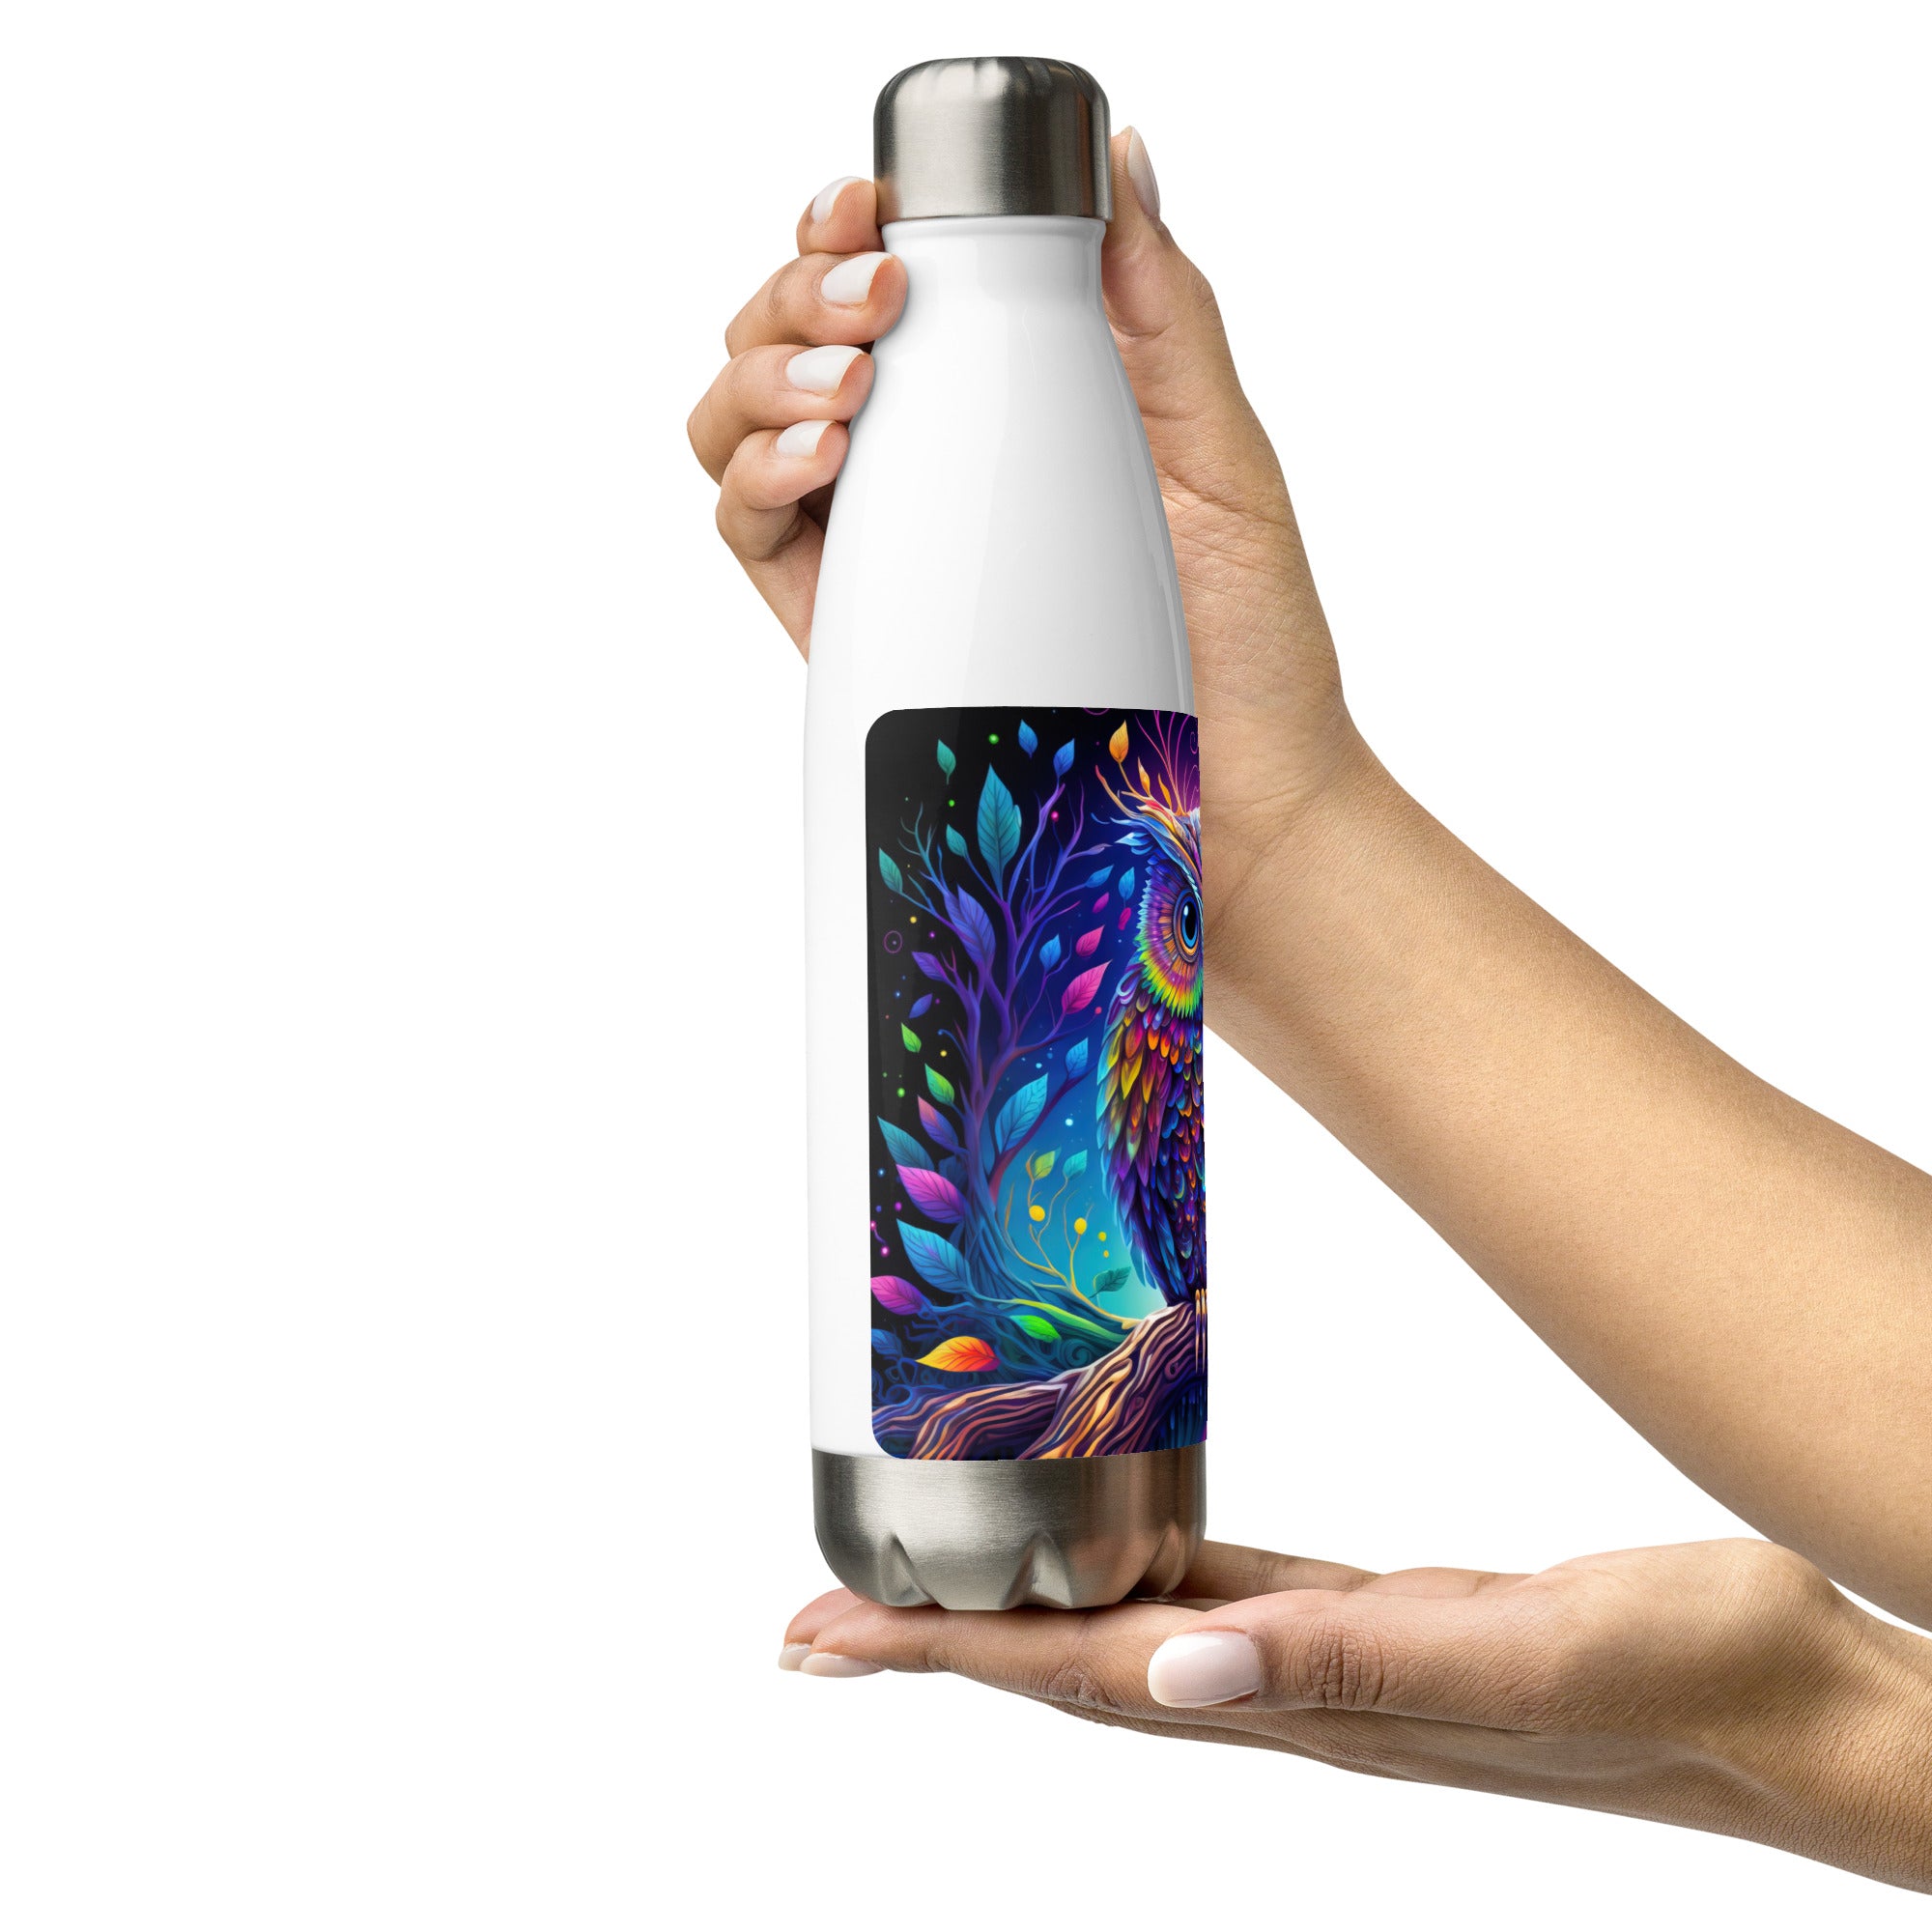 Stainless Steel Water Bottle,  Hot/Cold, Gift